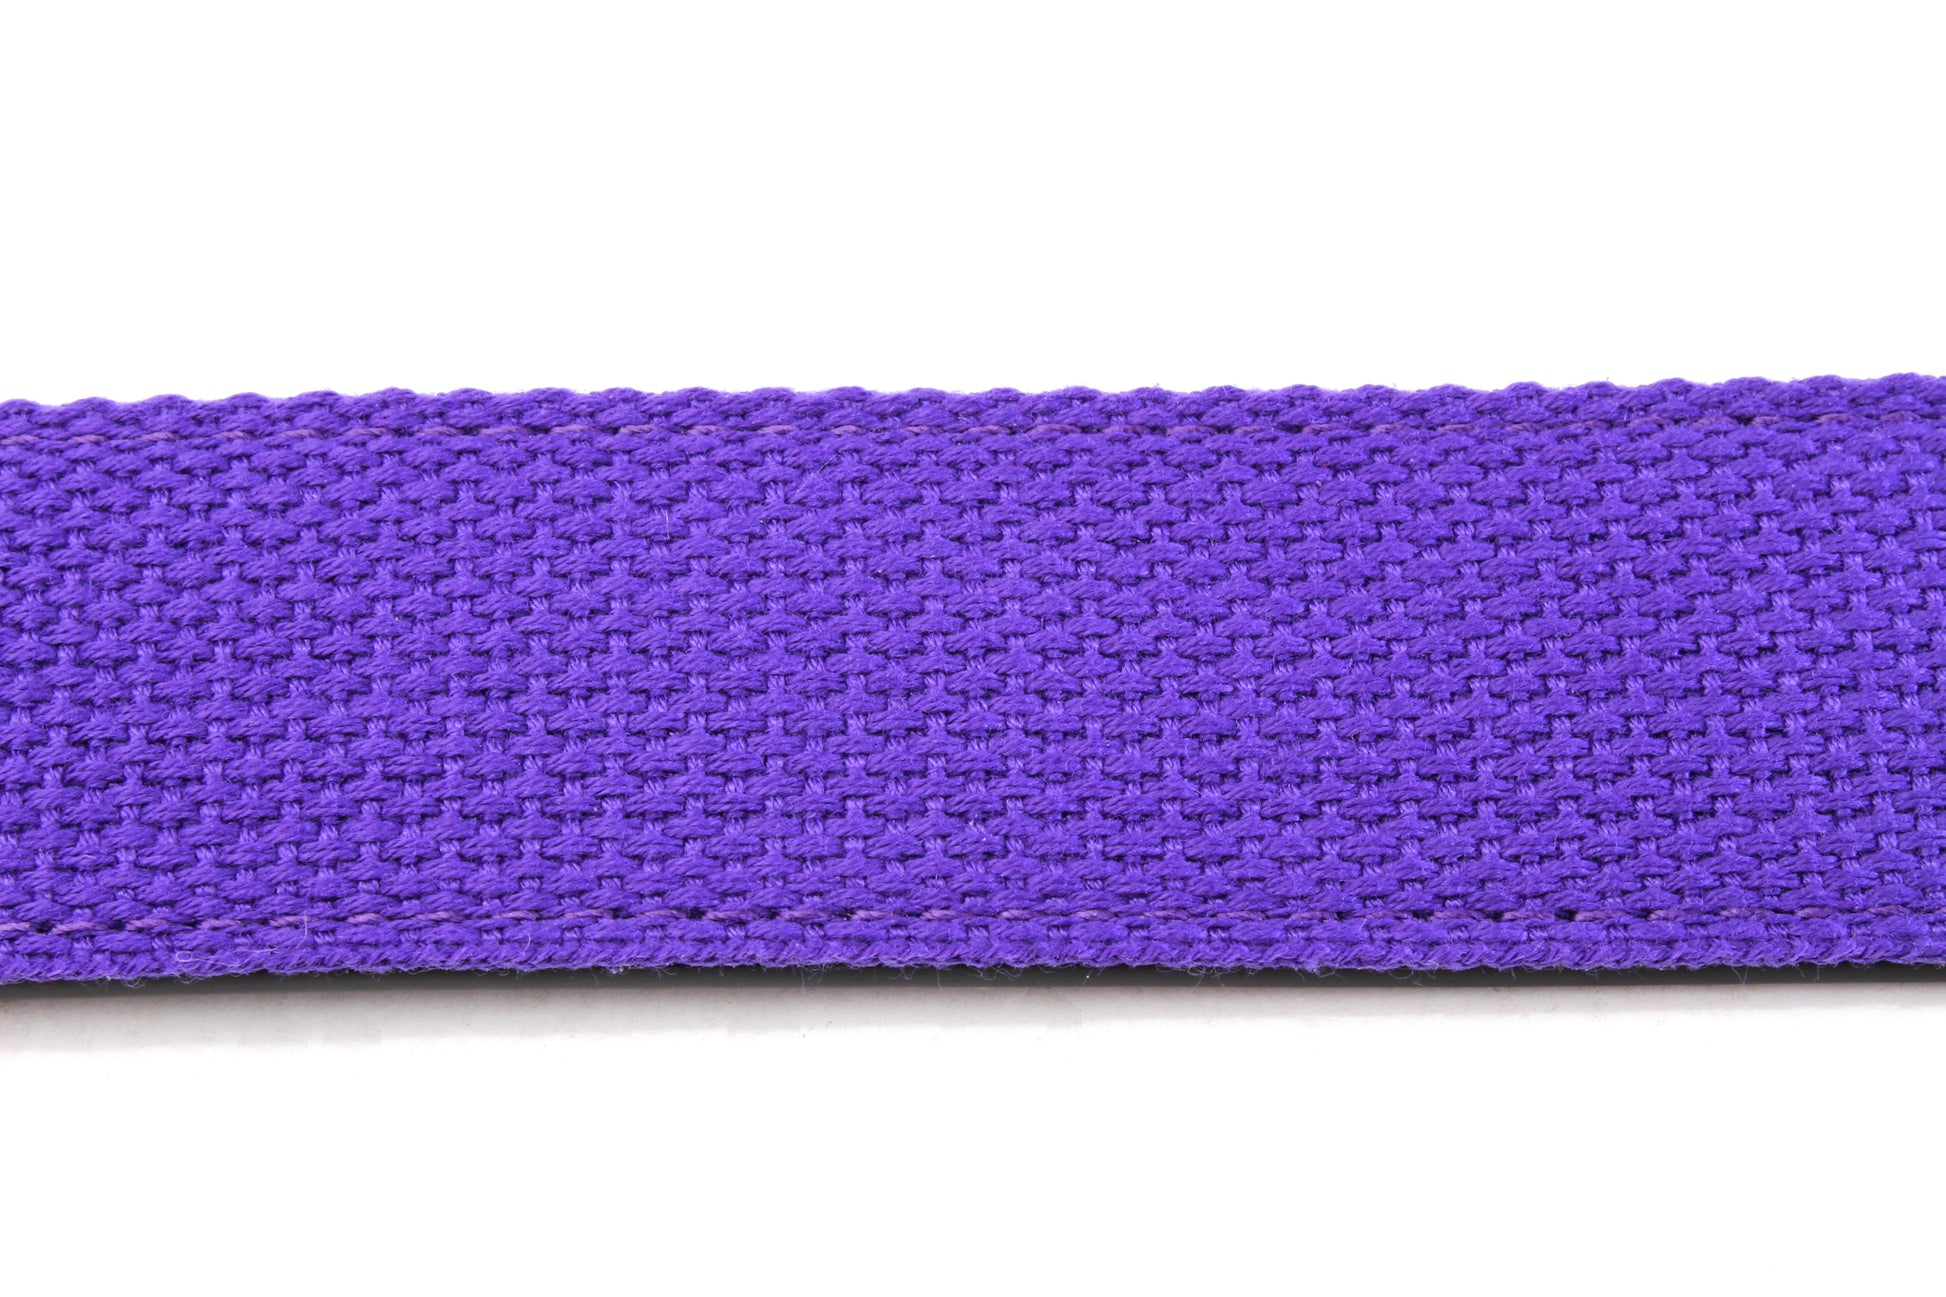 Men's canvas belt strap in purple, 1.5 inches wide, casual look, stitching close up